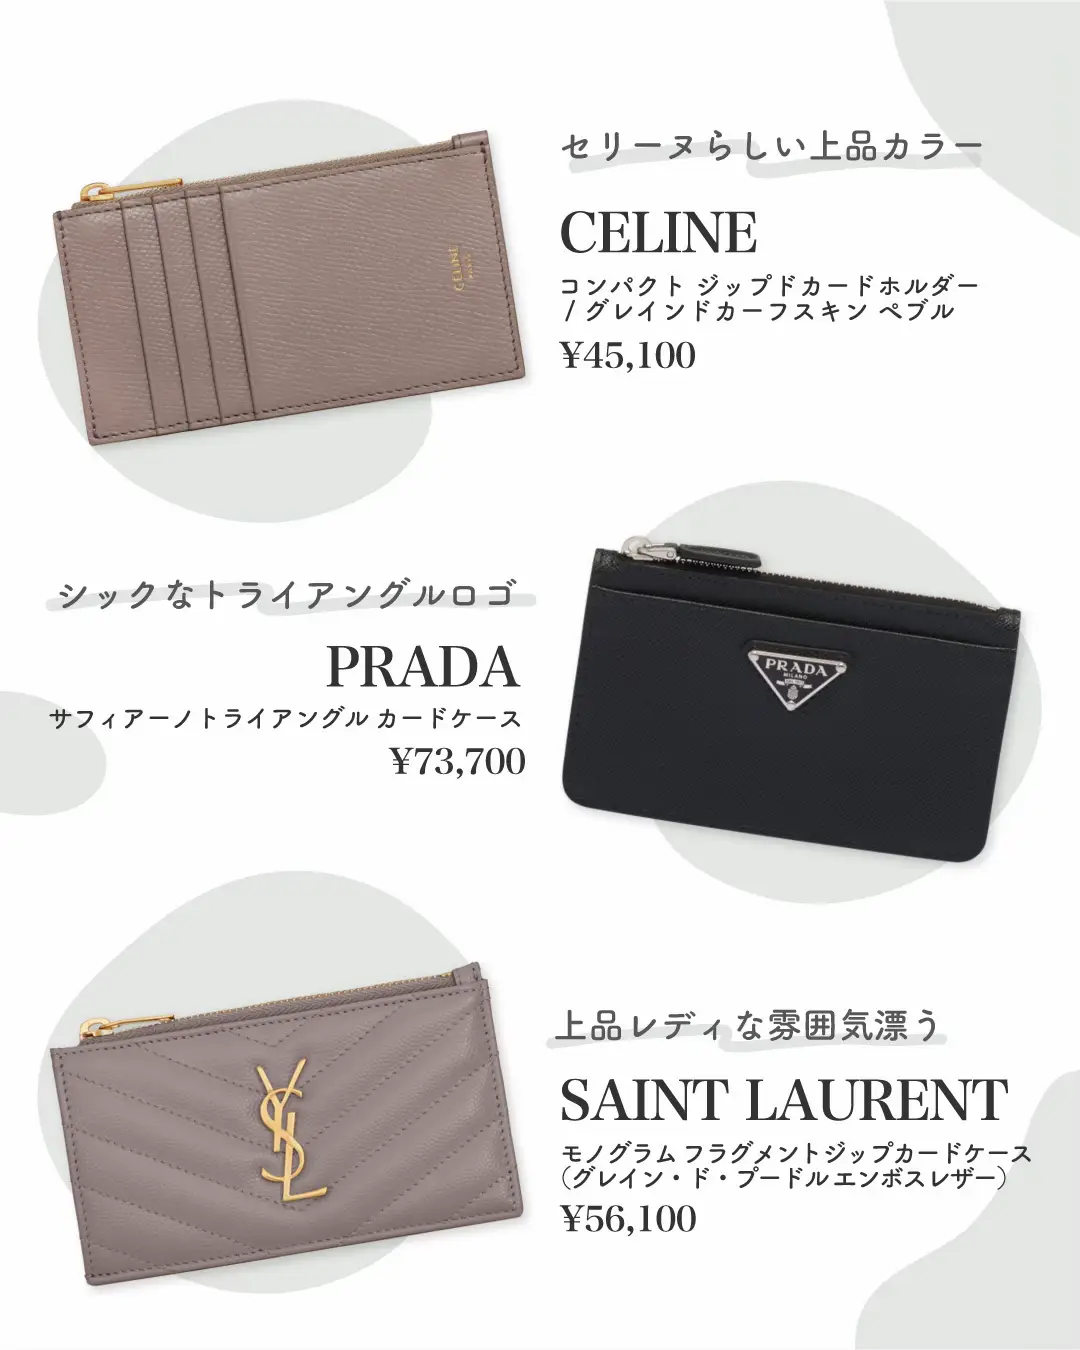 Cashless school must-see] card case | Gallery posted by karin__